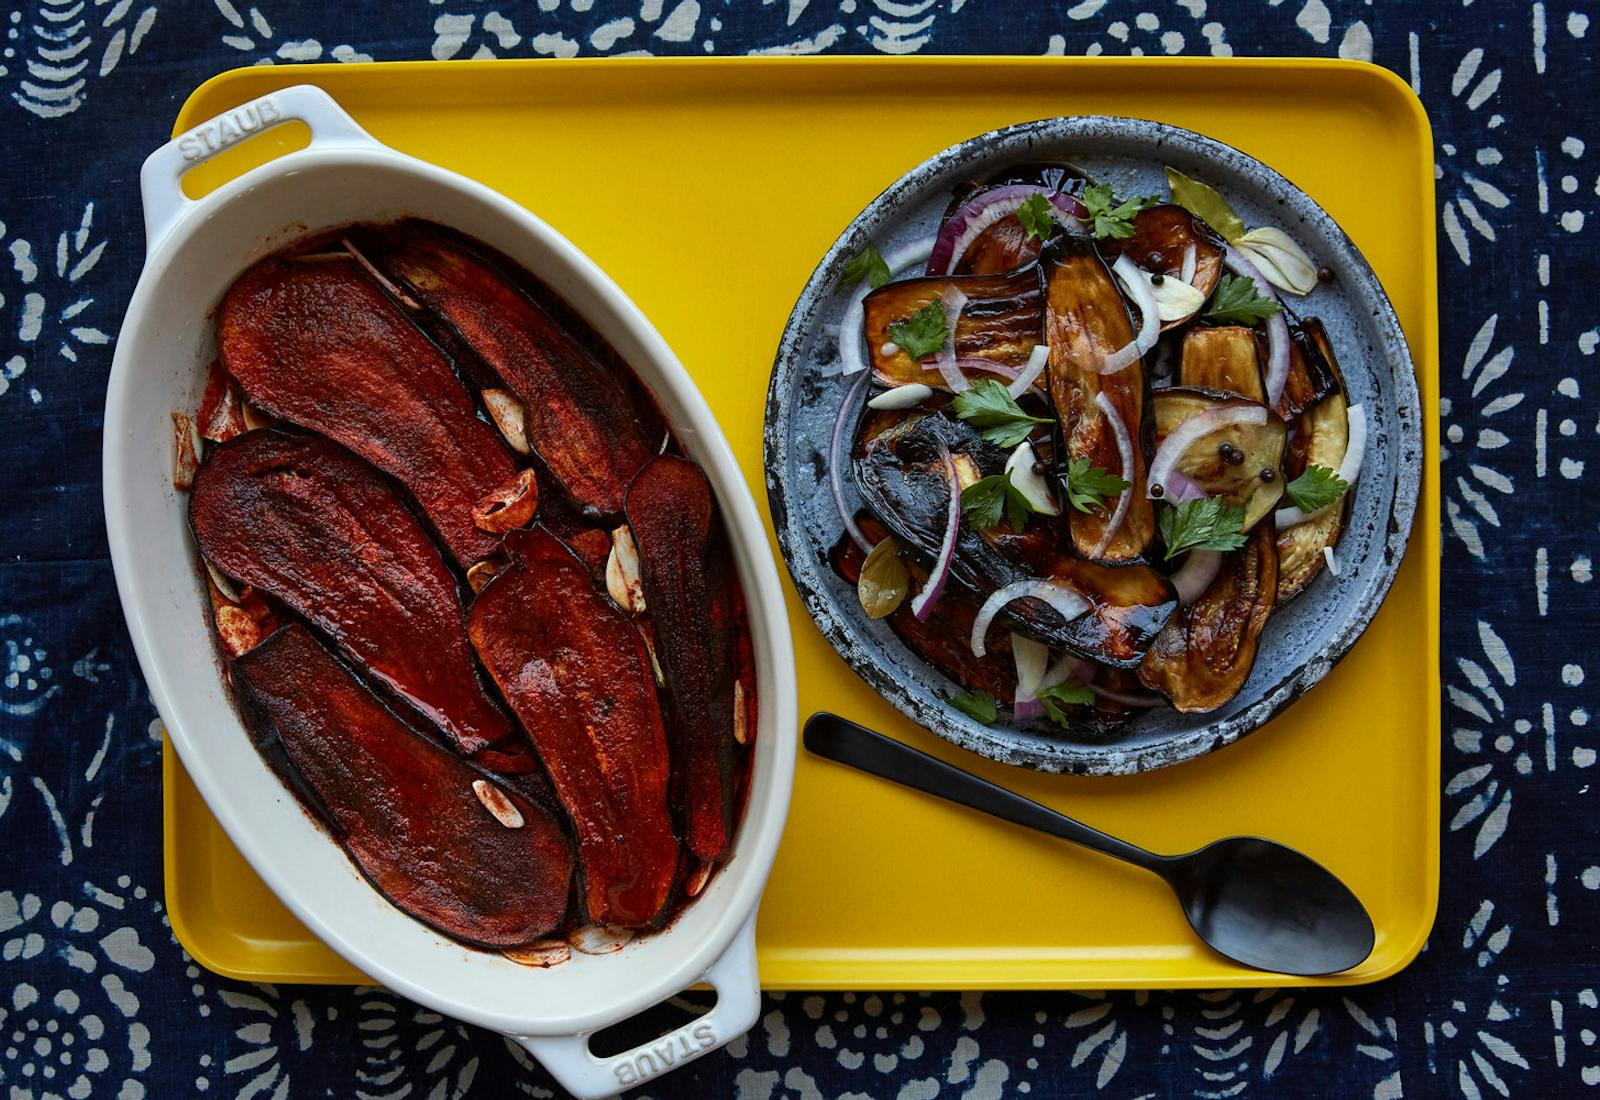 Eggplant in paprika in white casserole dish next to eggplant in vinegar on blue plate on yellow tray, atop blue patterned tablecloth.